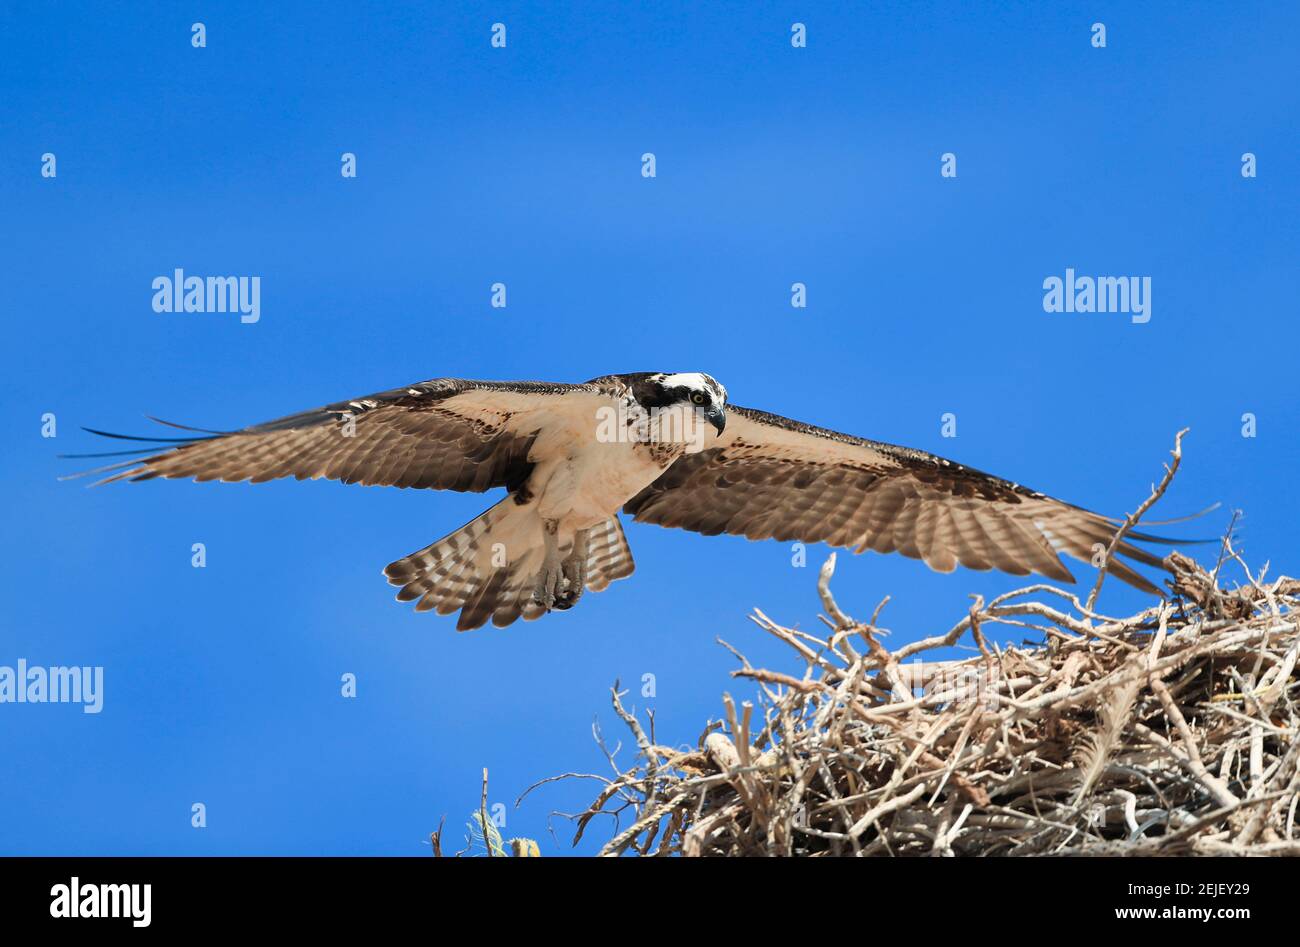 The osprey Pandion haliaetus (Osprey). Abductor. Eagle flying.The osprey lands in the nest. Pandion haliaetus (Osprey). Raptor. Eagle flying. Eagle flies, fly, wings. Tastiota, Sonora.(Photo: Luis Gutierrez / NortePhoto.com) The osprey. Pandion haliaetus (Osprey). Raptor. Eagle flying.El águila pescadora aterriza en el nido. Pandion haliaetus (Osprey). Ave rapaz. águila volando. aguila vuela, volar, alas. Tastiota, Sonora. (Photo: Luis Gutierrez / NortePhoto.com) Stock Photo